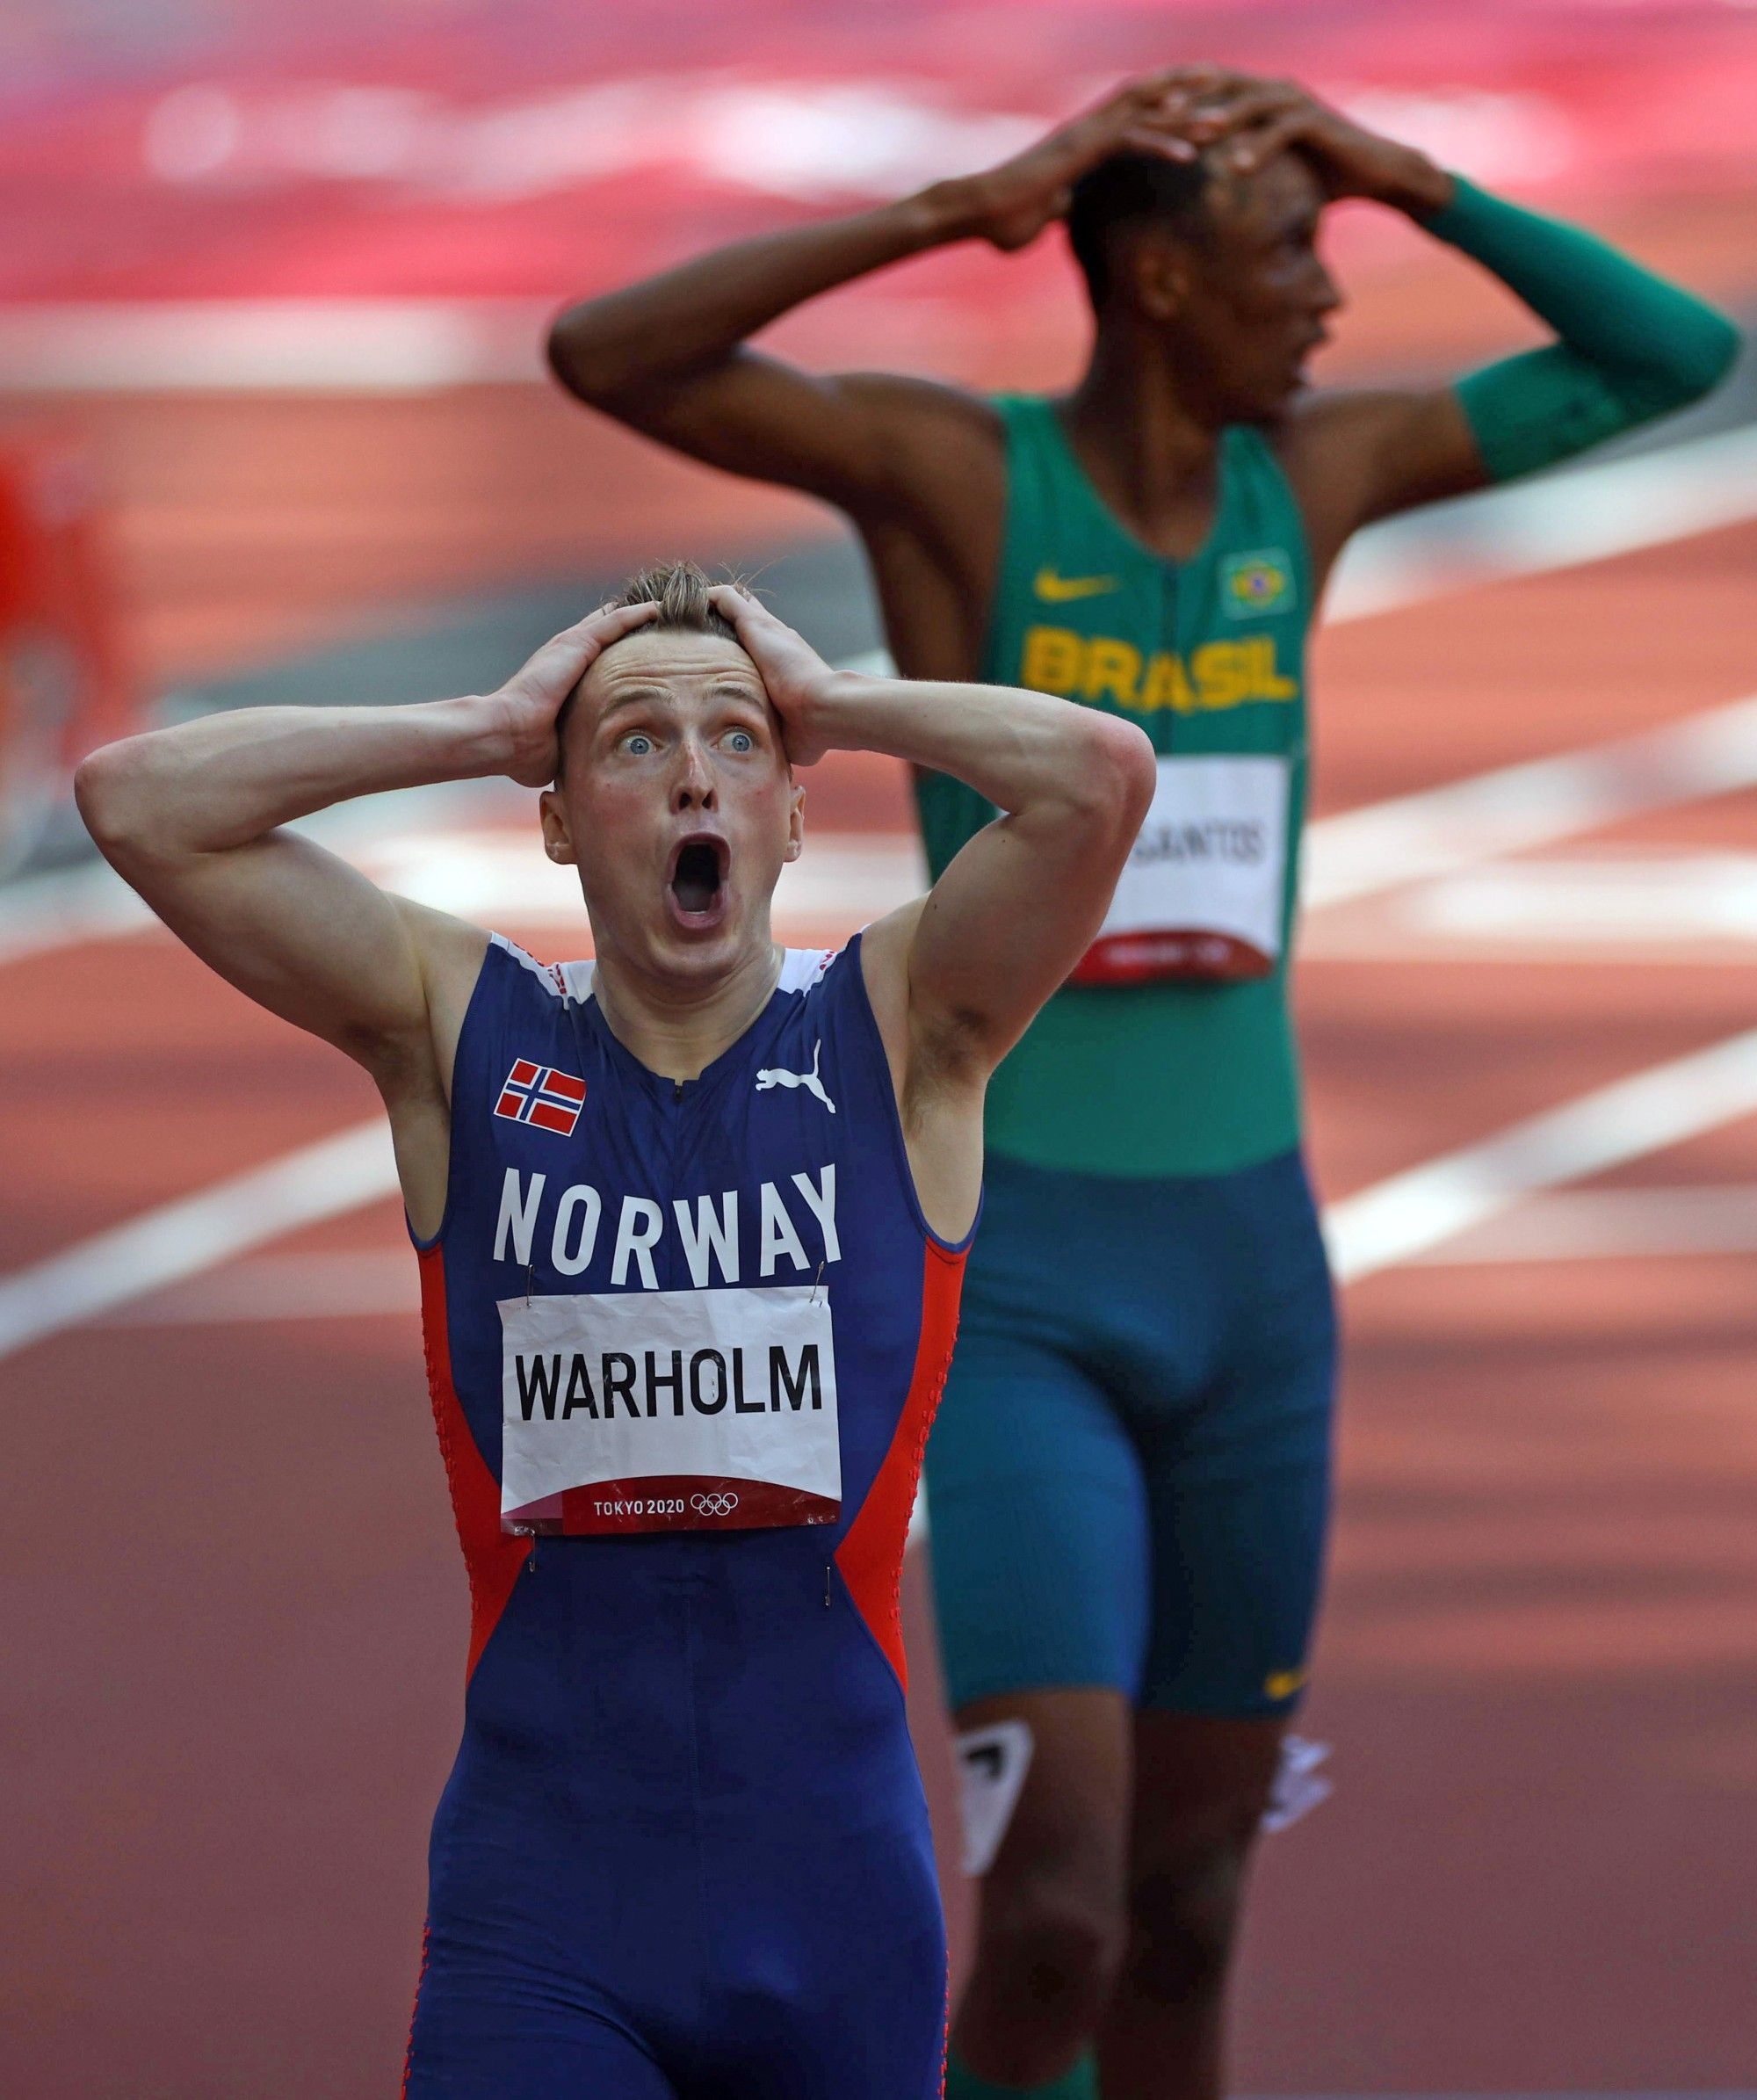 Karsten Warholm, Digital exhibition, World Athletics photograph of the year, Shortlisted images, 2000x2390 HD Handy